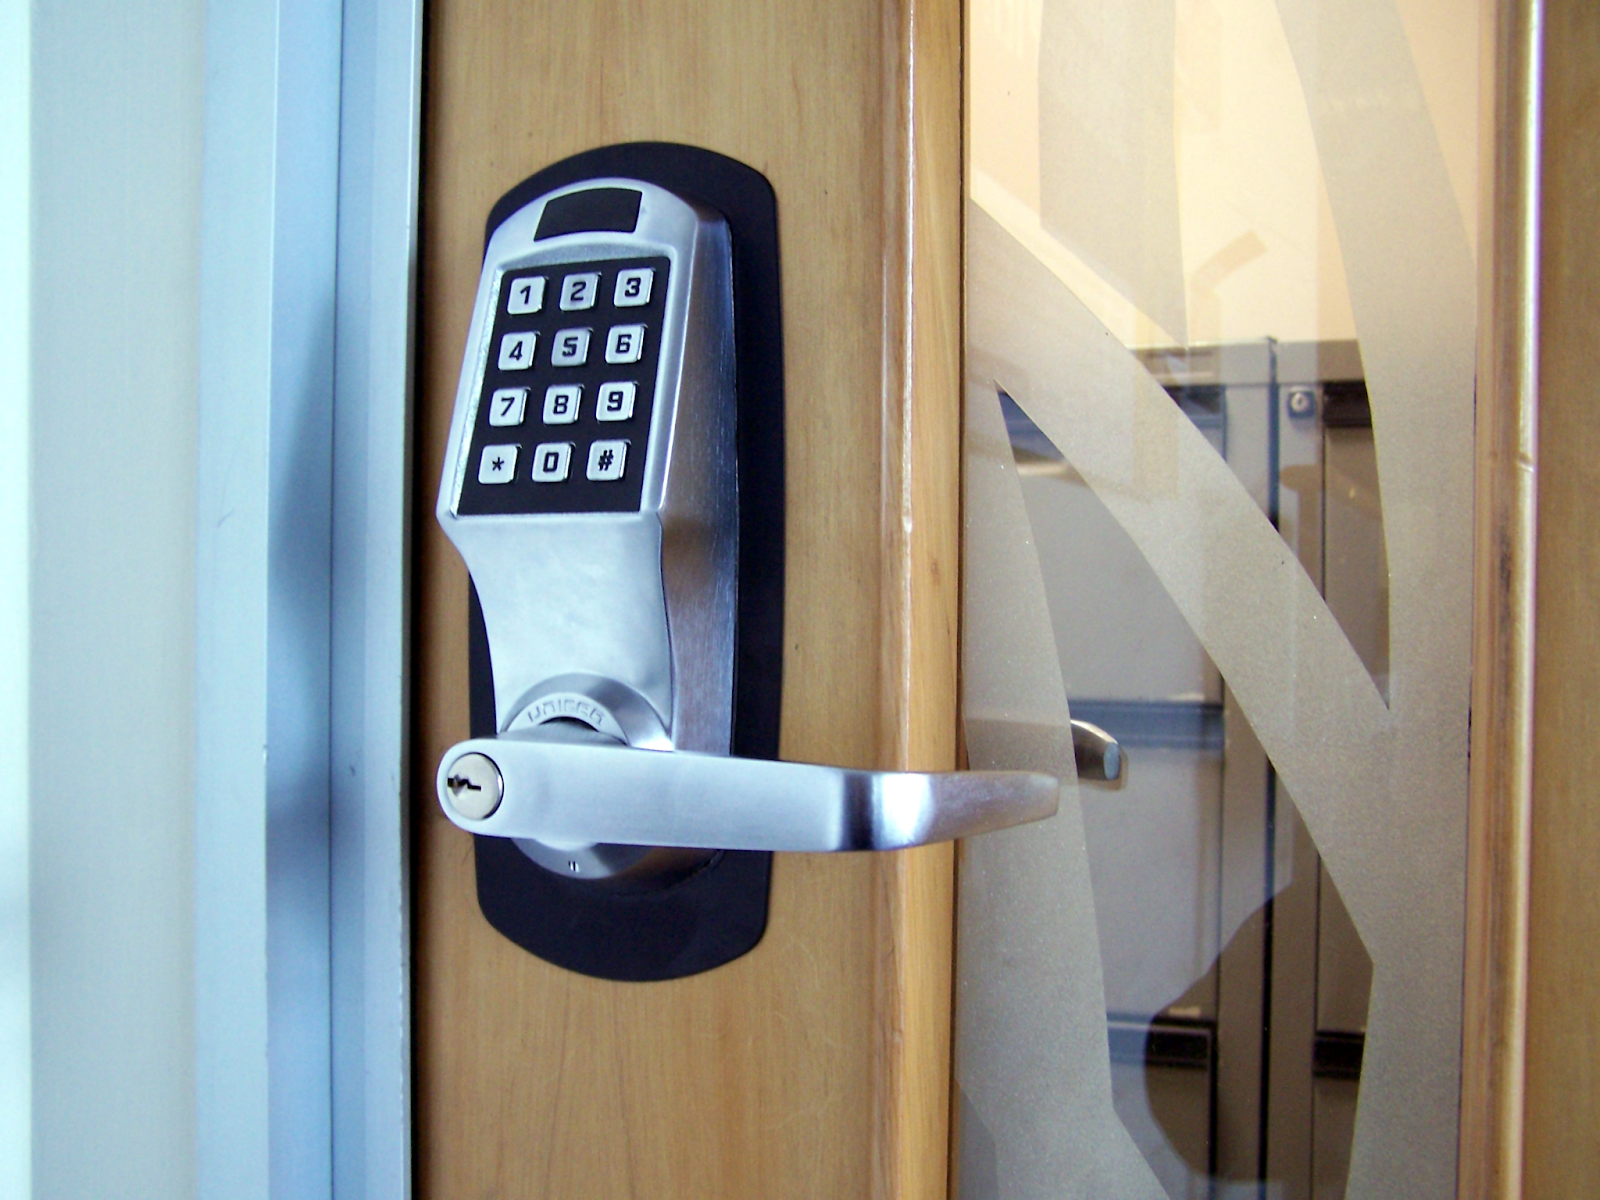 know the benefits of installing a metal gate digital lock in your home - Know the benefits of installing a metal gate digital lock in your home